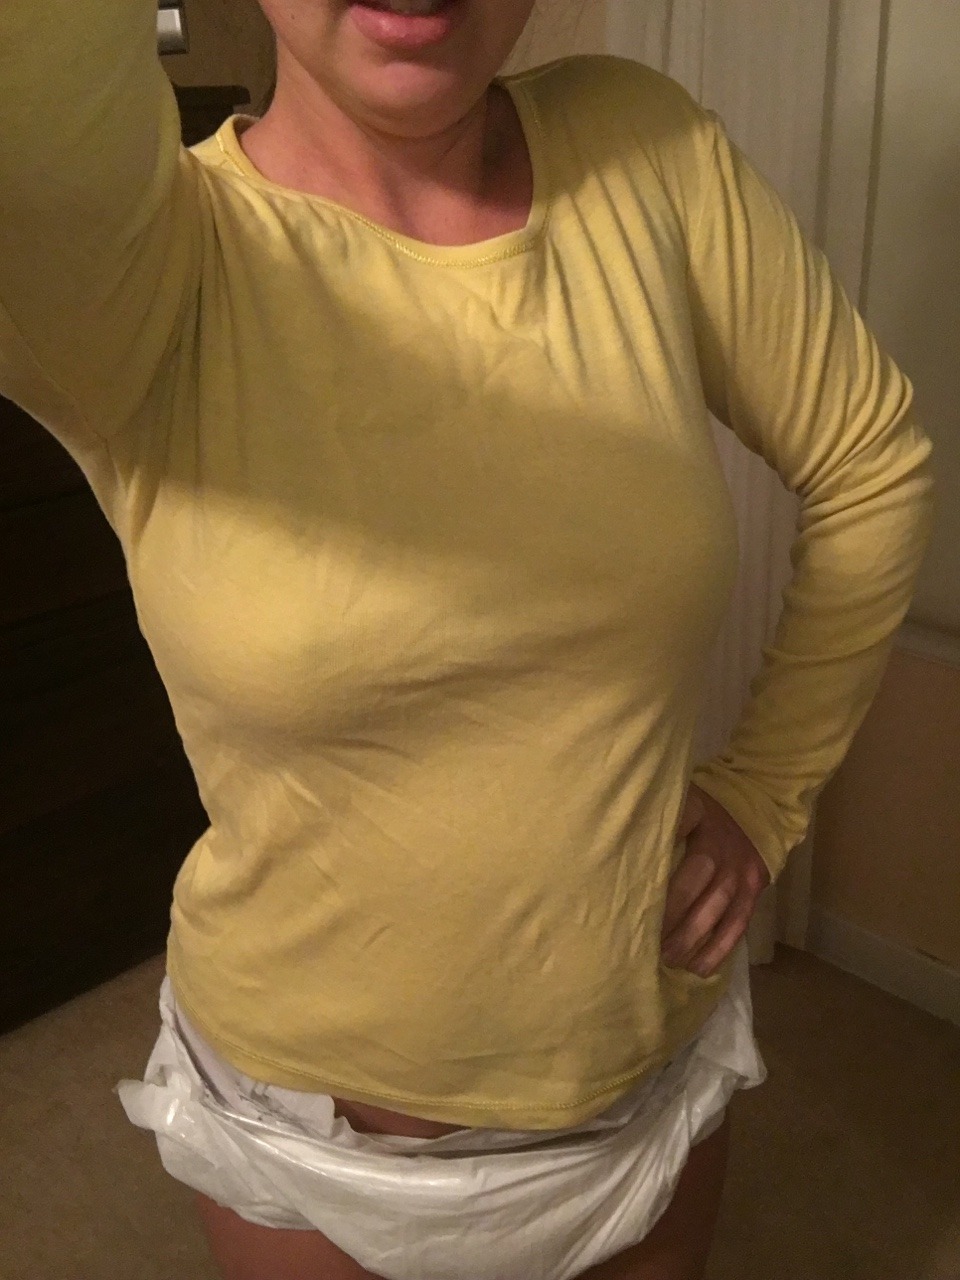 diaperedmilf:  Silly baby! You don’t need a bra. Babies don’t wear those things.